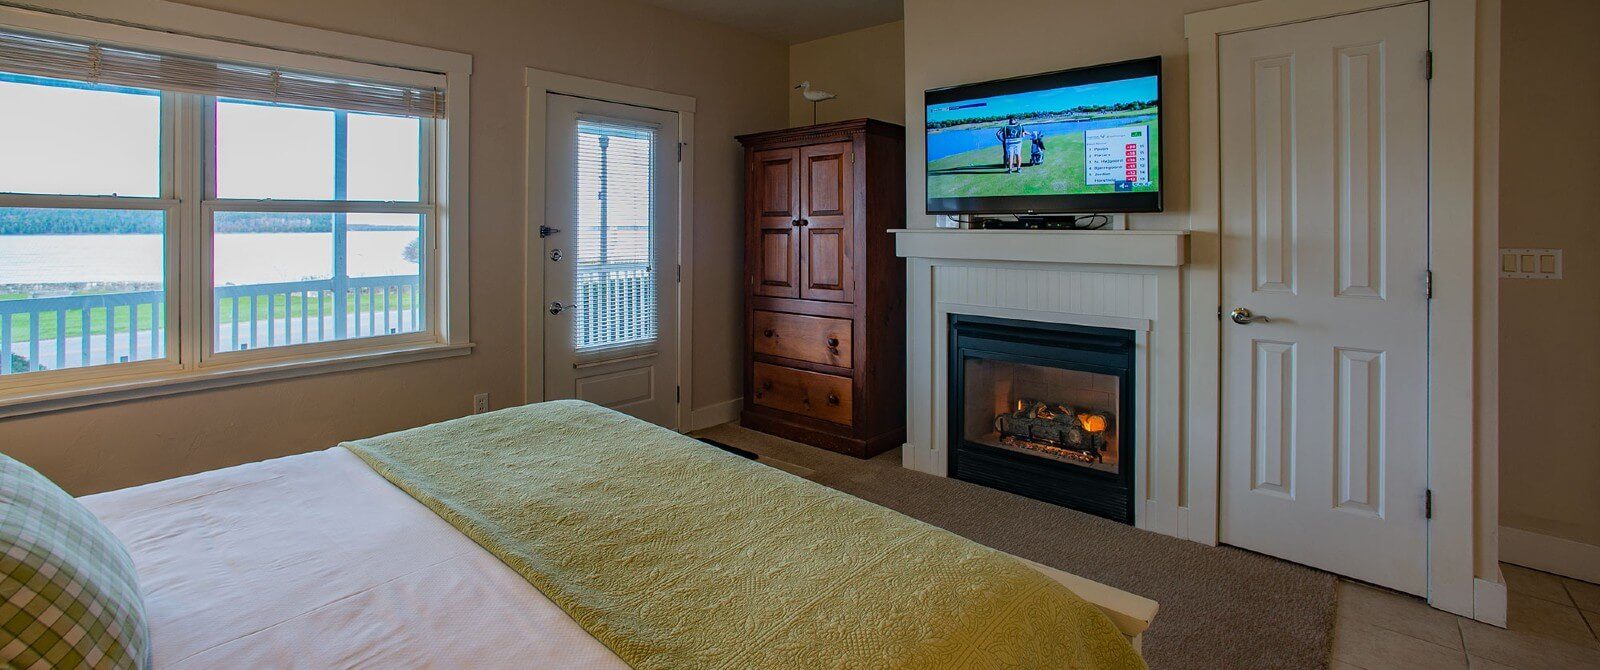 Bedroom with queen bed, large windows and door overlooking water, and TV over a gas fireplace